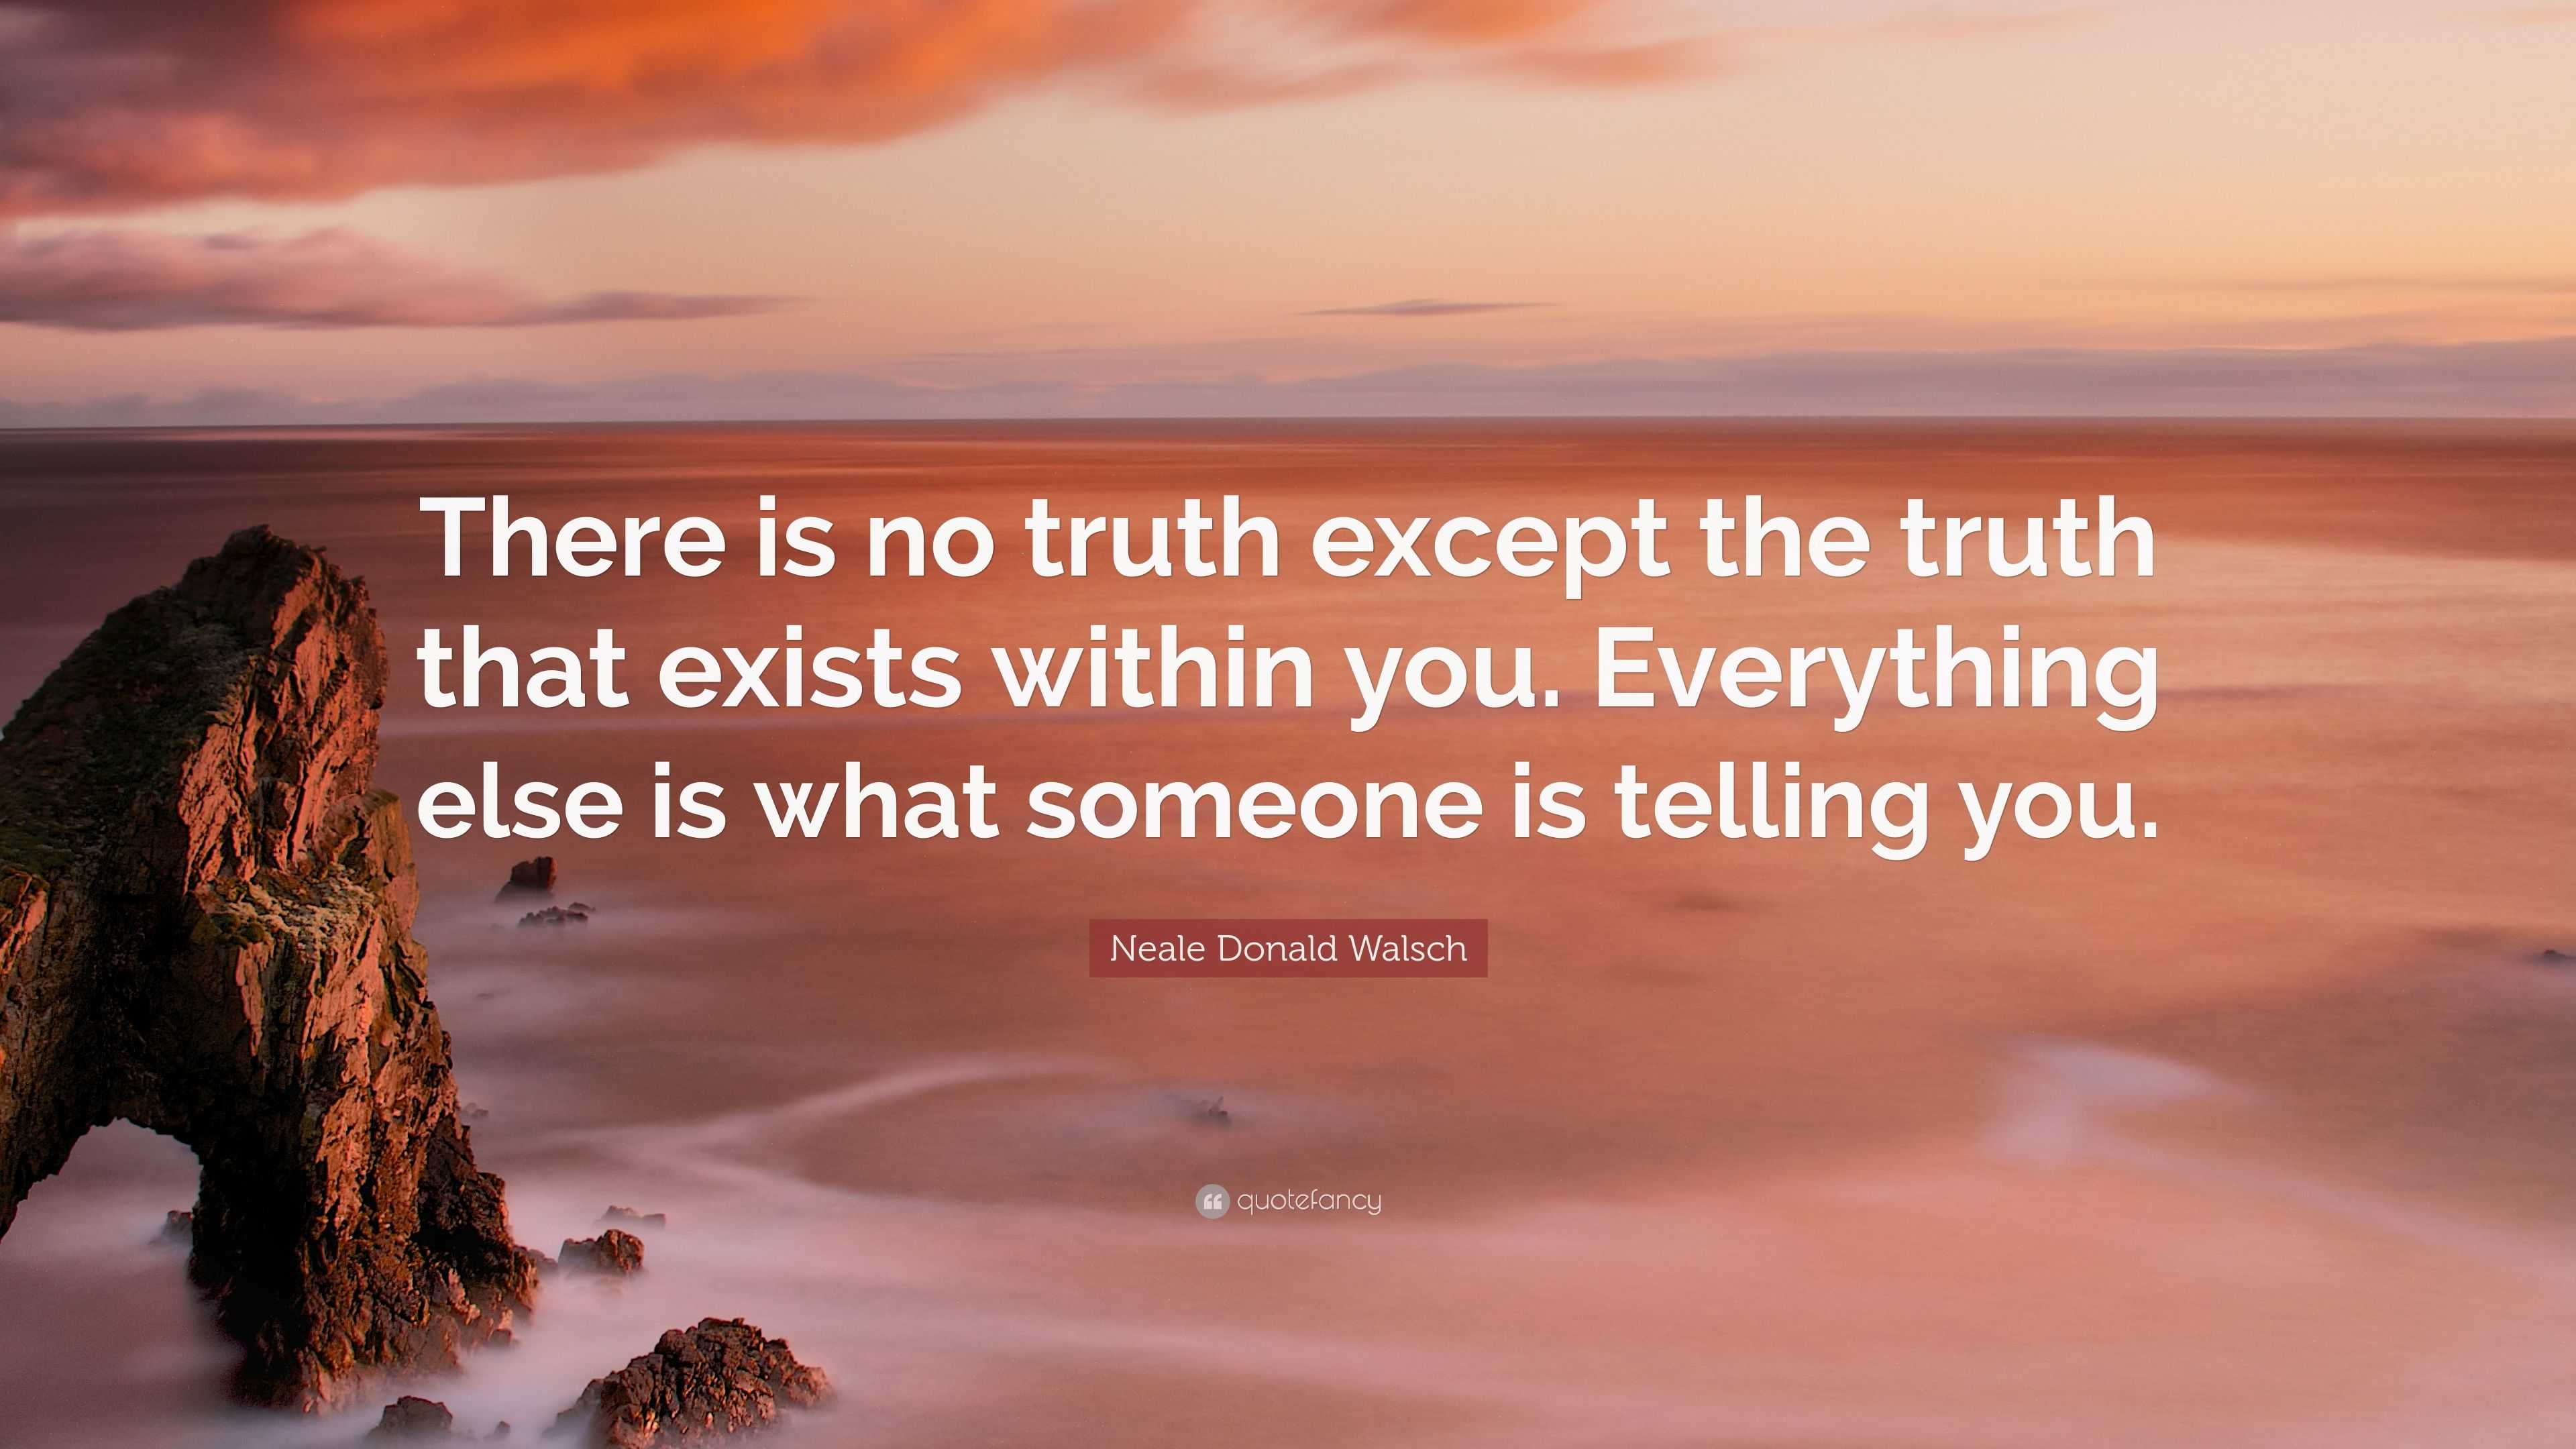 Neale Donald Walsch Quote “there Is No Truth Except The Truth That Exists Within You 